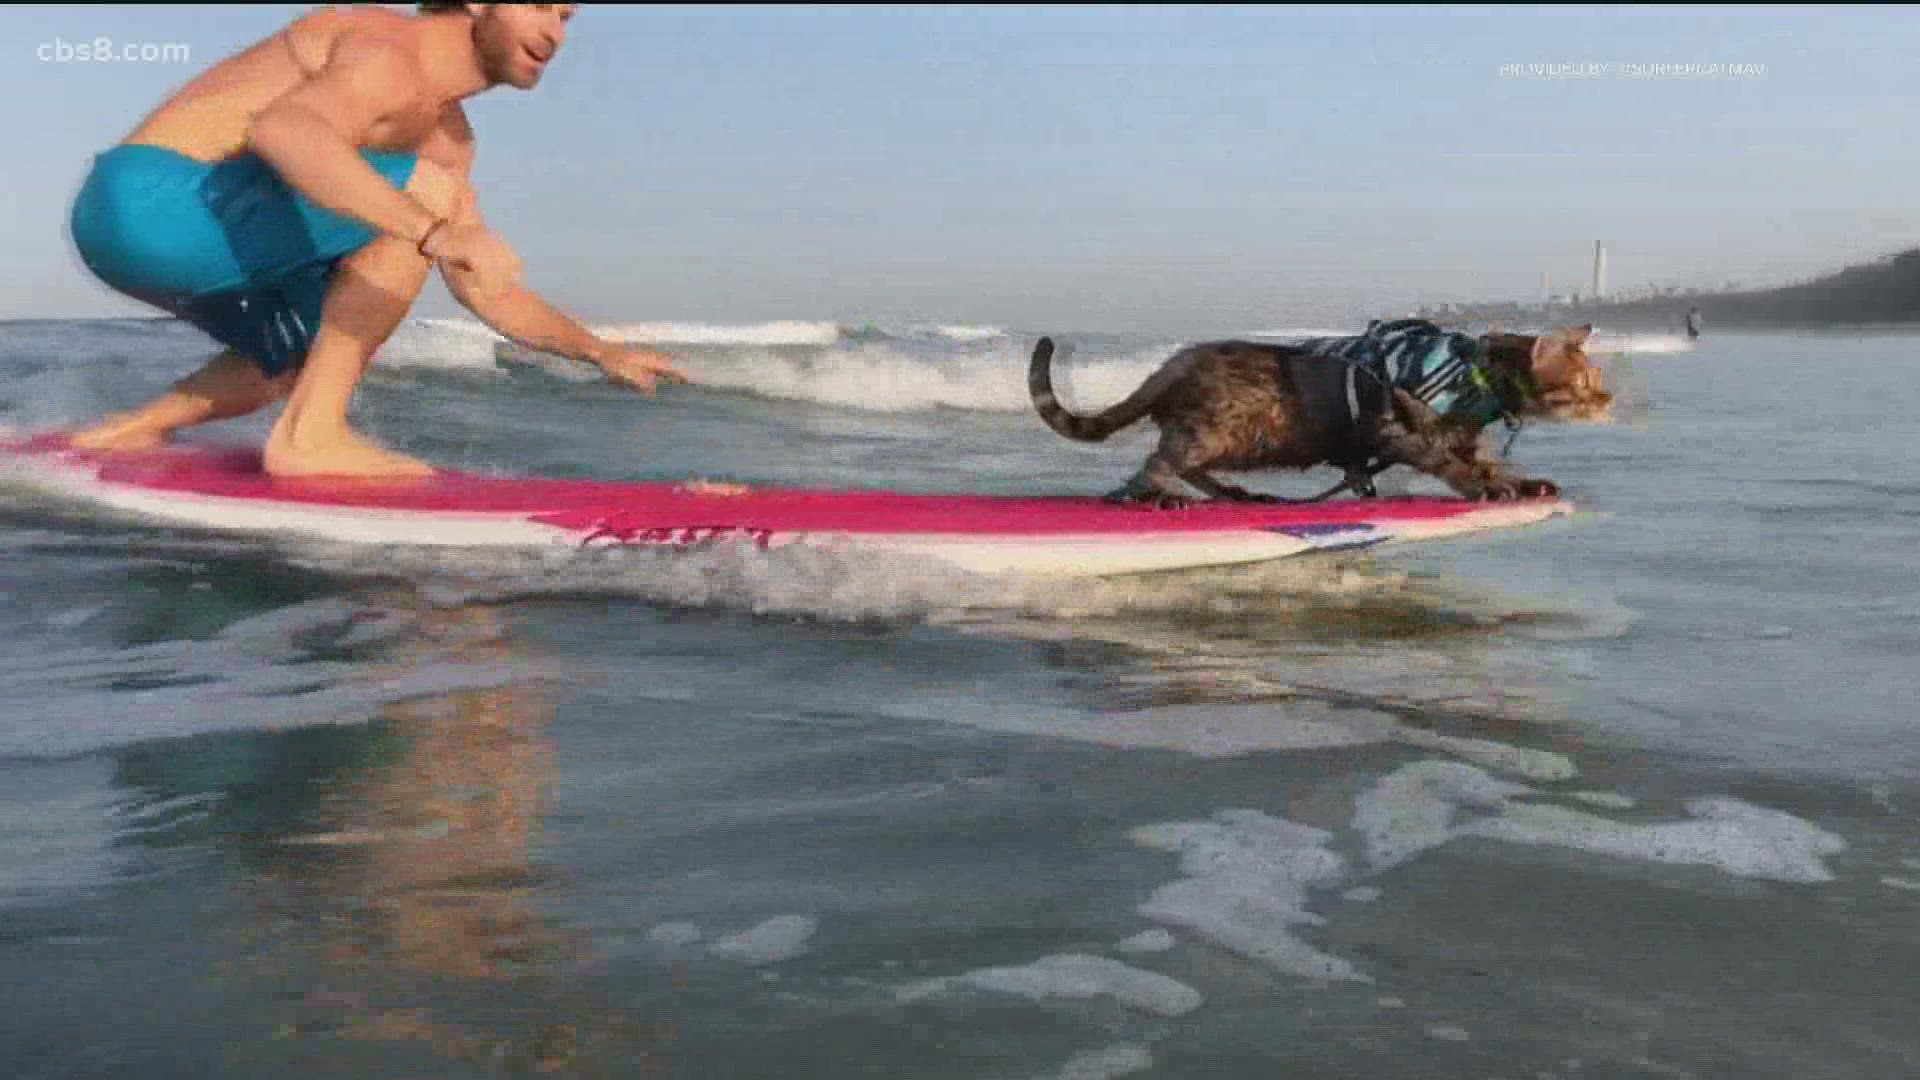 Maverick the cat loves the water. His owners started taking him on a stand-up paddle board, eventually he graduated to catching waves.